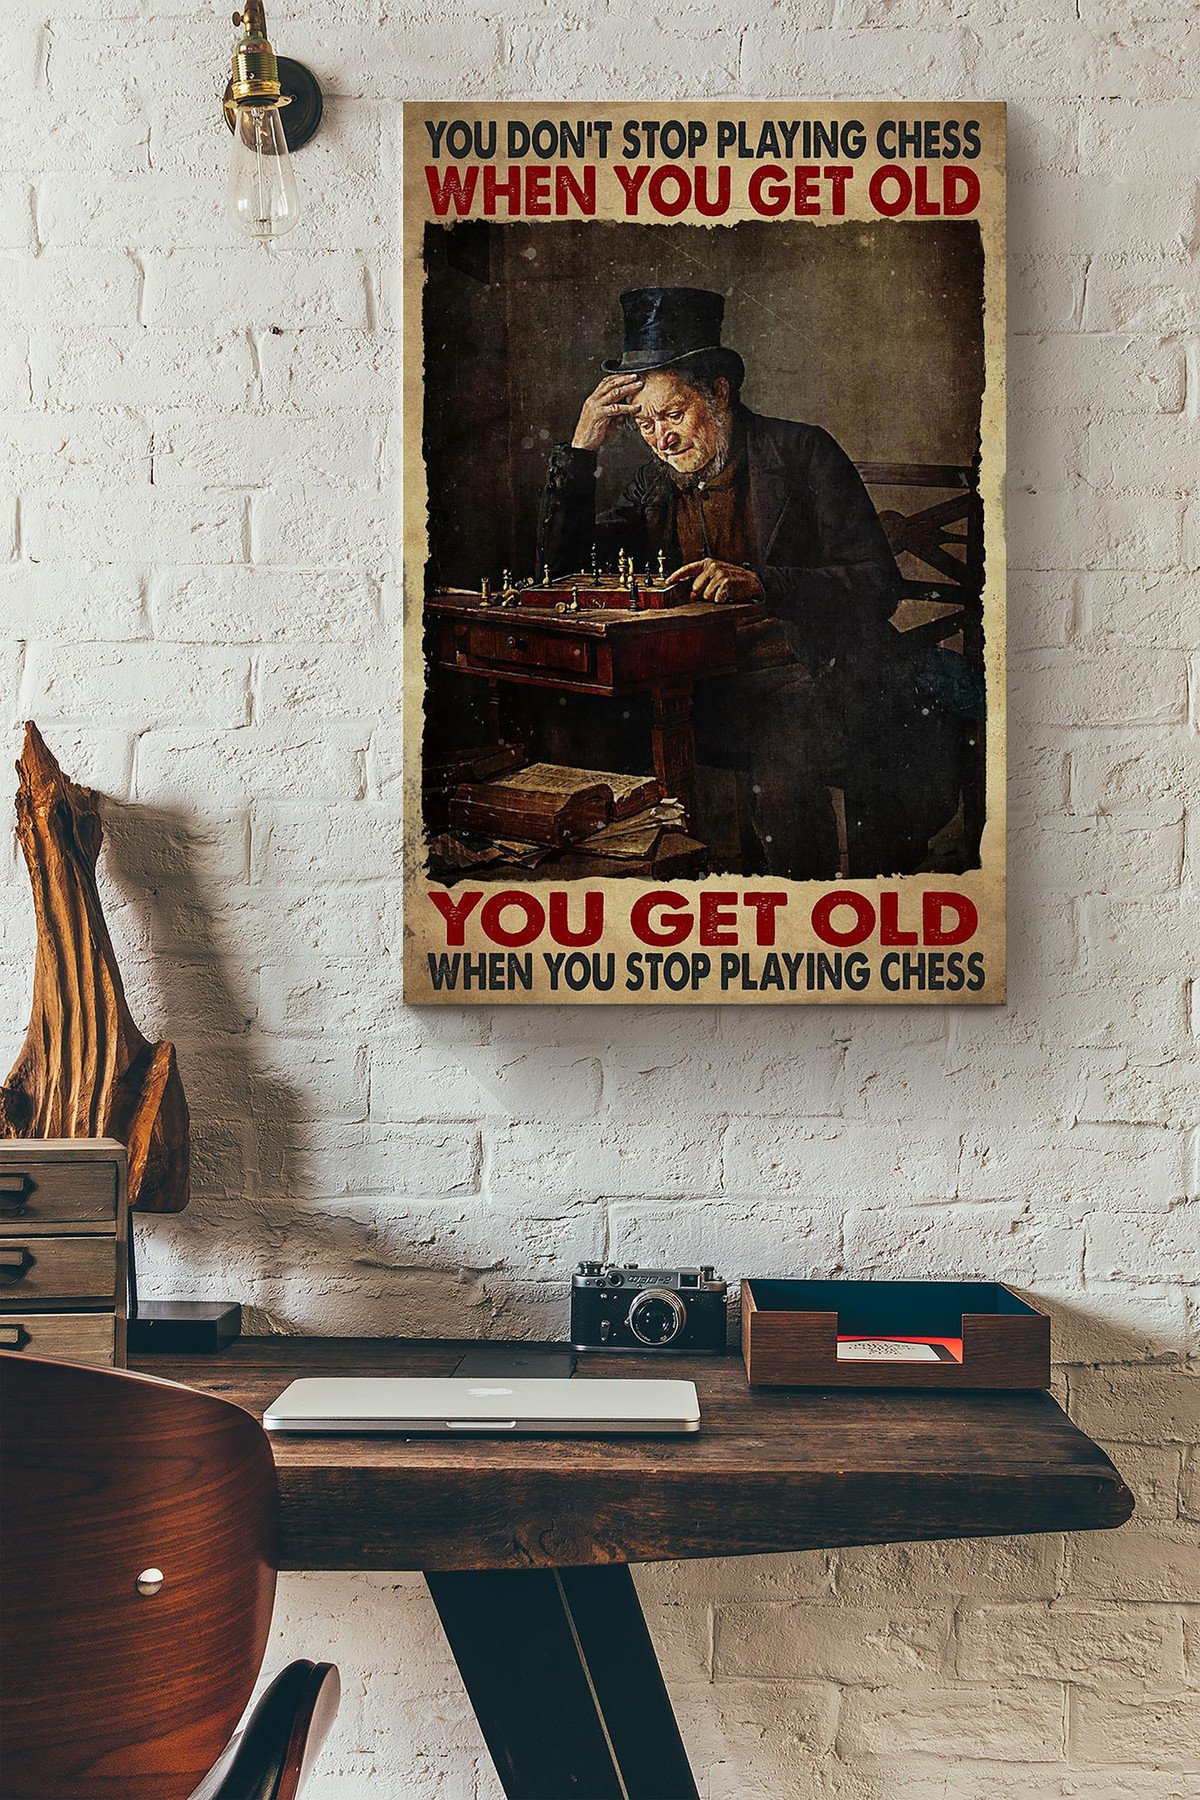 You Dont Stop Playing Chess When You Get Old You Get Old When You Stop Playing Chess Canvas Painting Ideas, Canvas Hanging Prints, Gift Idea Framed Prints, Canvas Paintings Wrapped Canvas 8x10